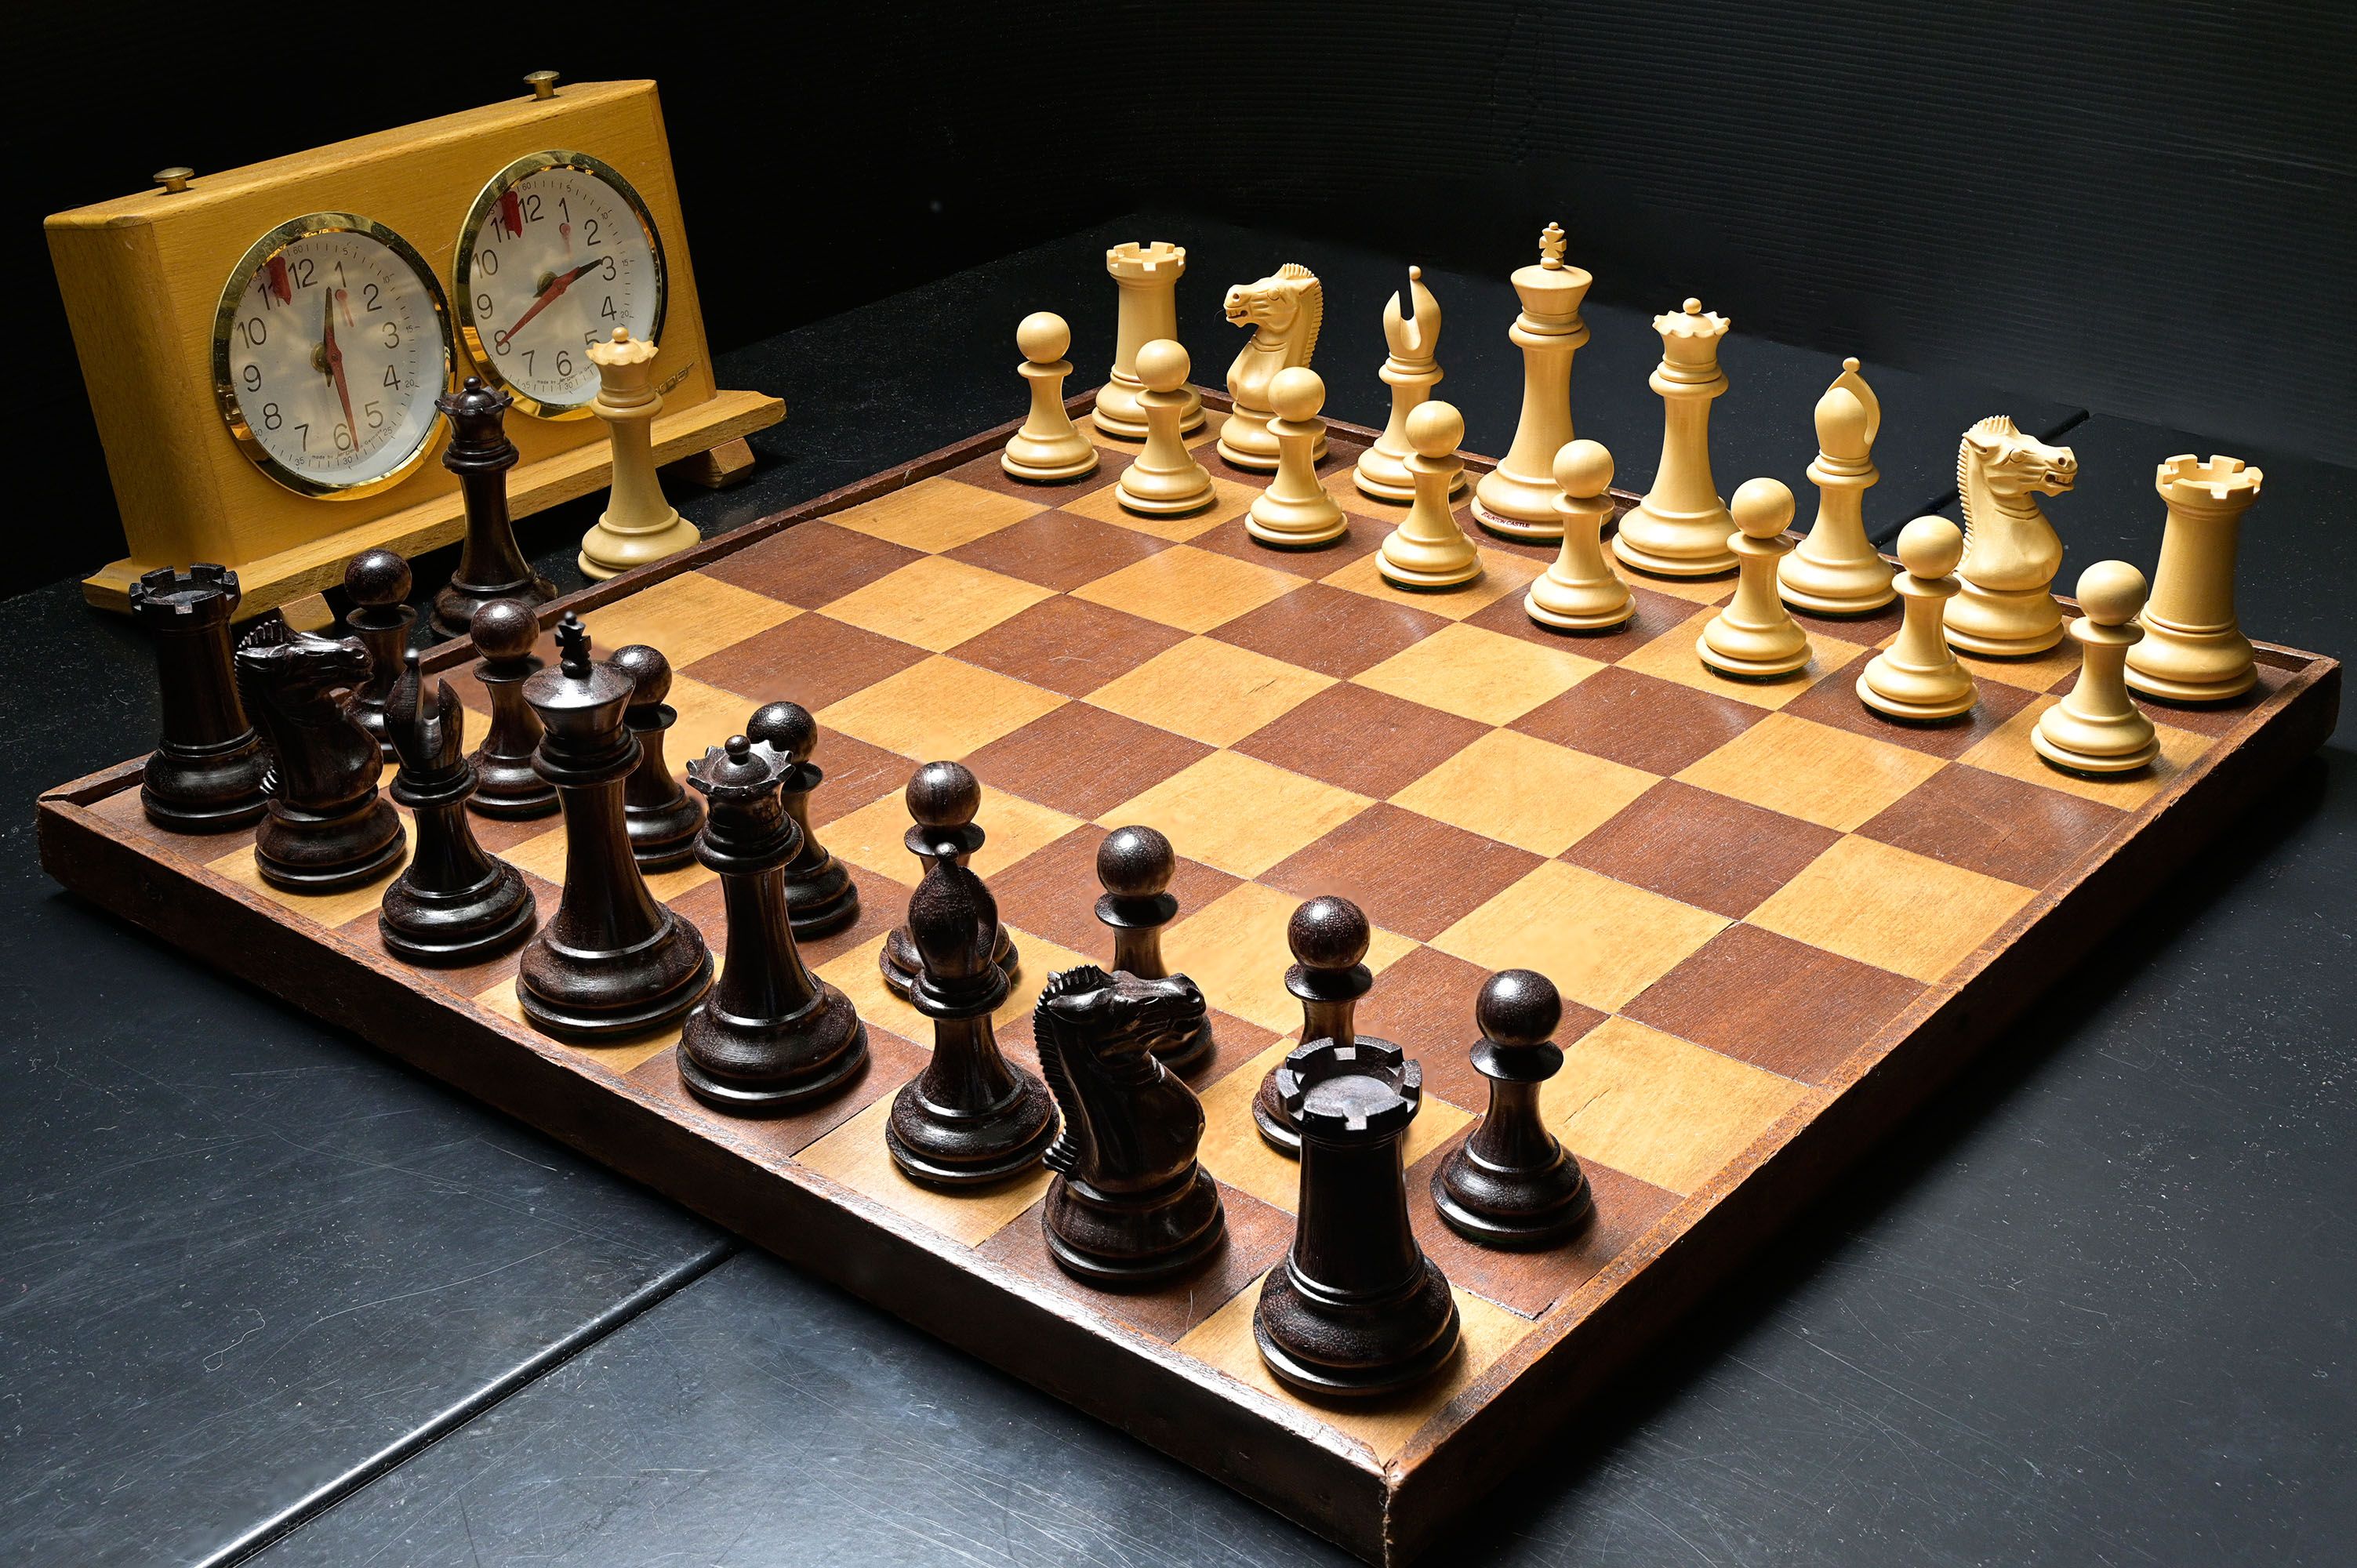 French Lardy Chess pieces - Chess Forums - Page 2 